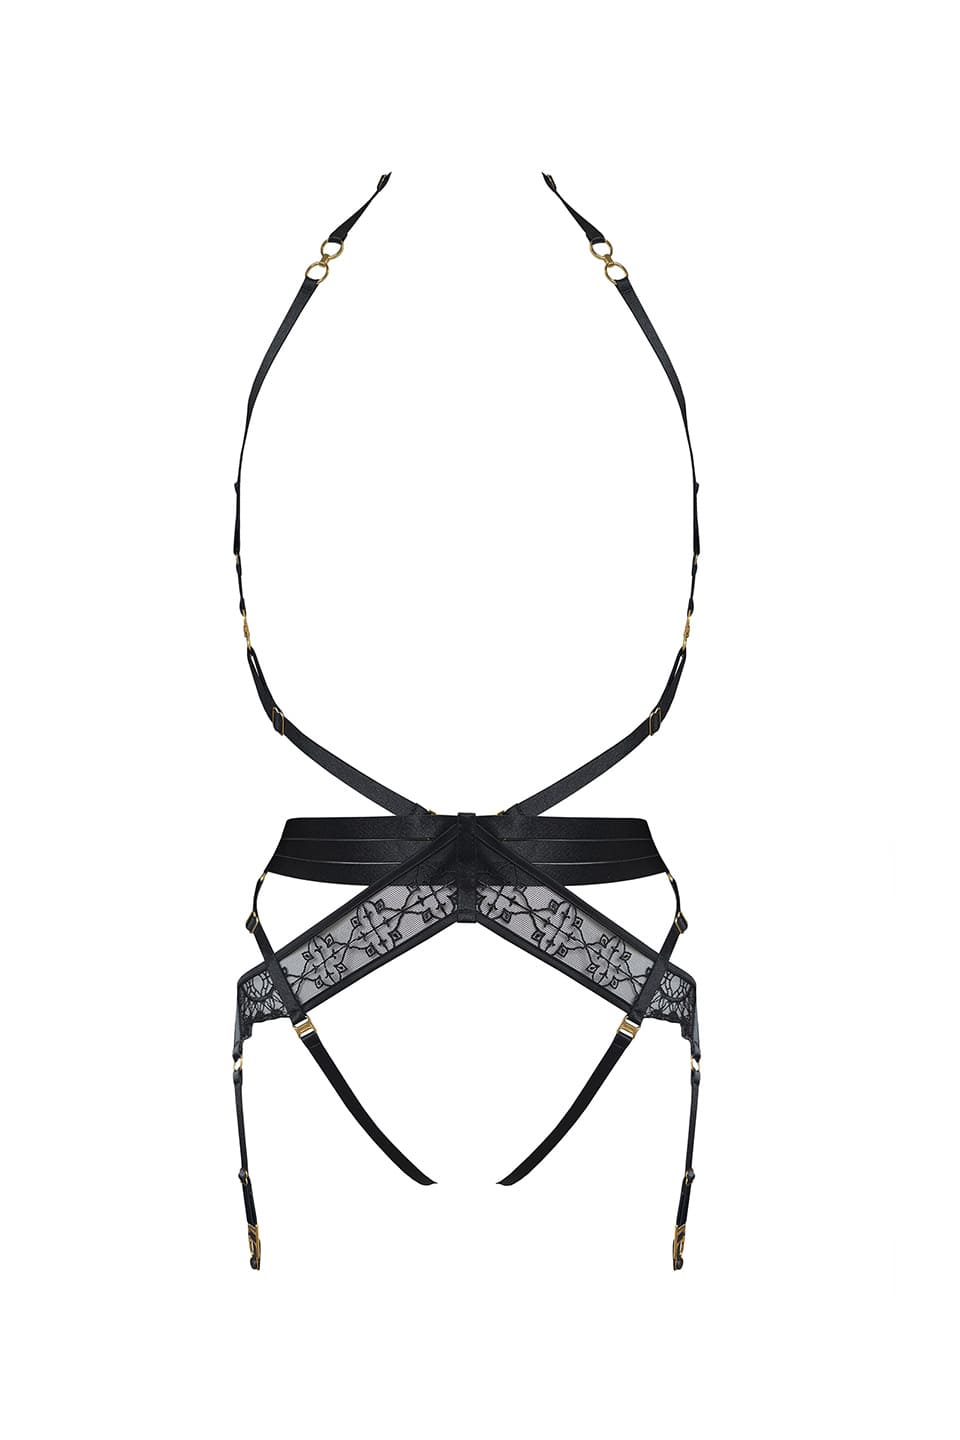 Thumbnail for Product gallery 1, Mari Suspender Harness Black